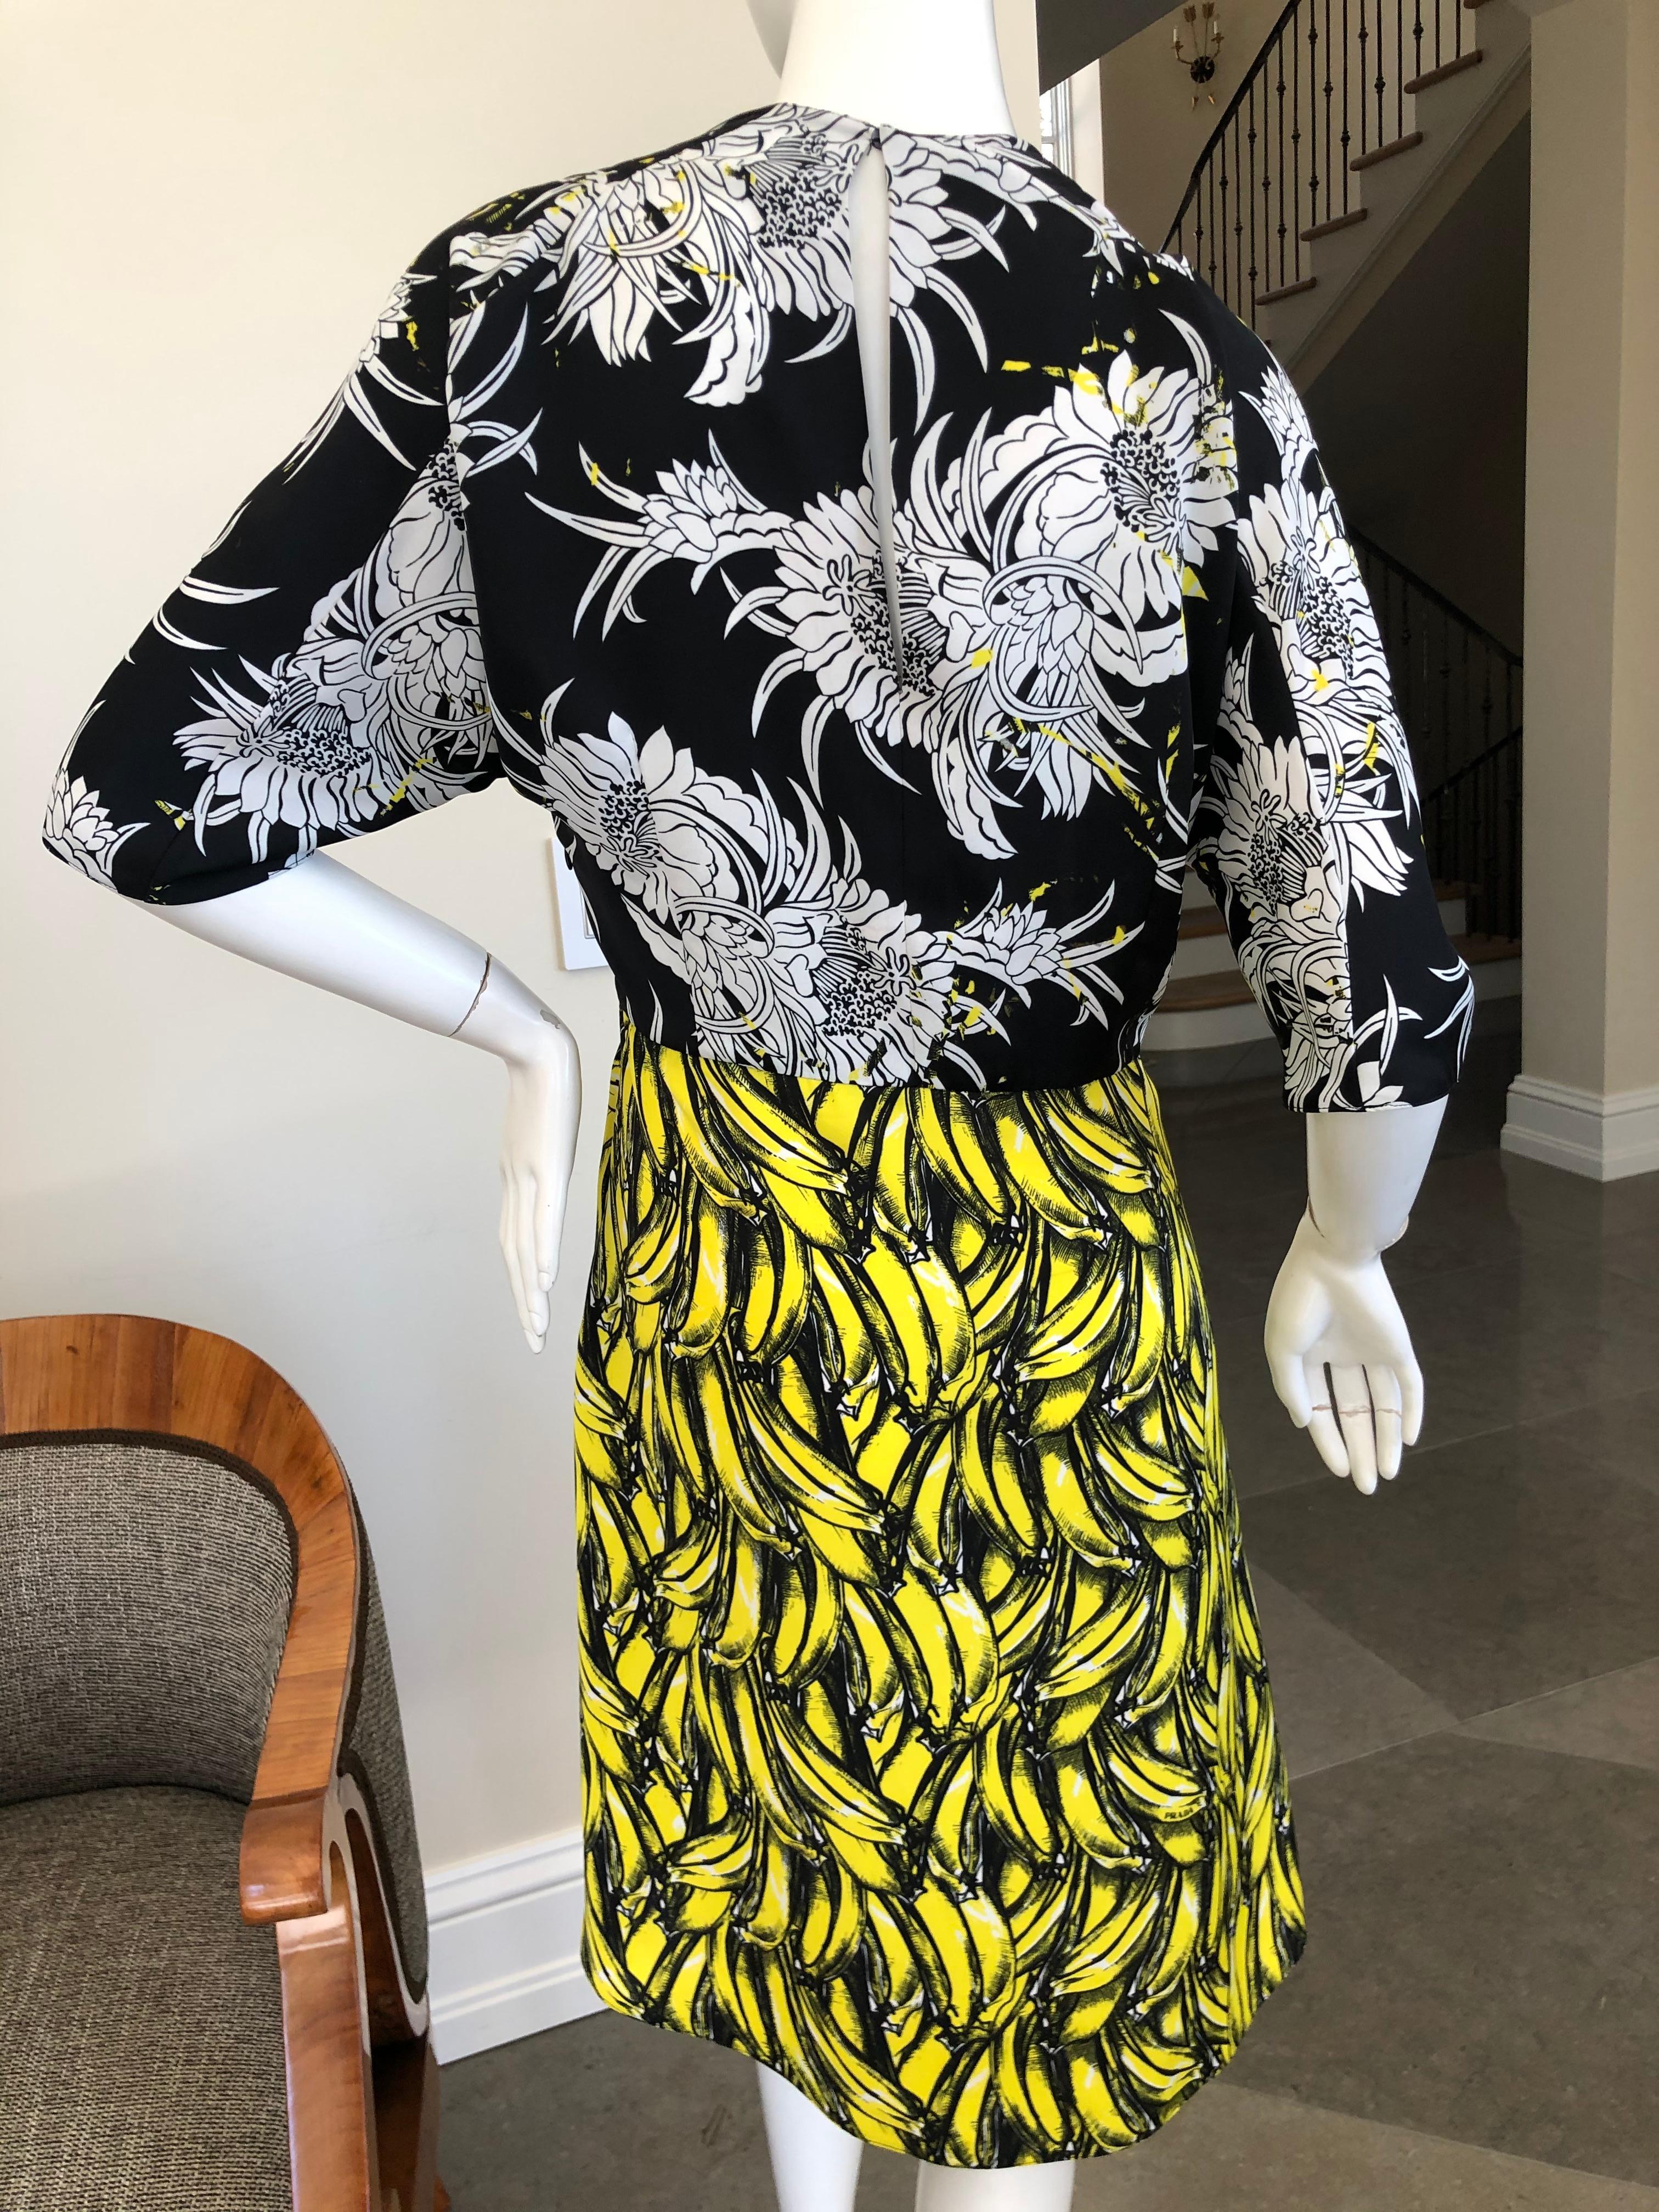 Prada Banana and Dahlia Print Dress with Pleated Accents A/W 2018 For Sale 2